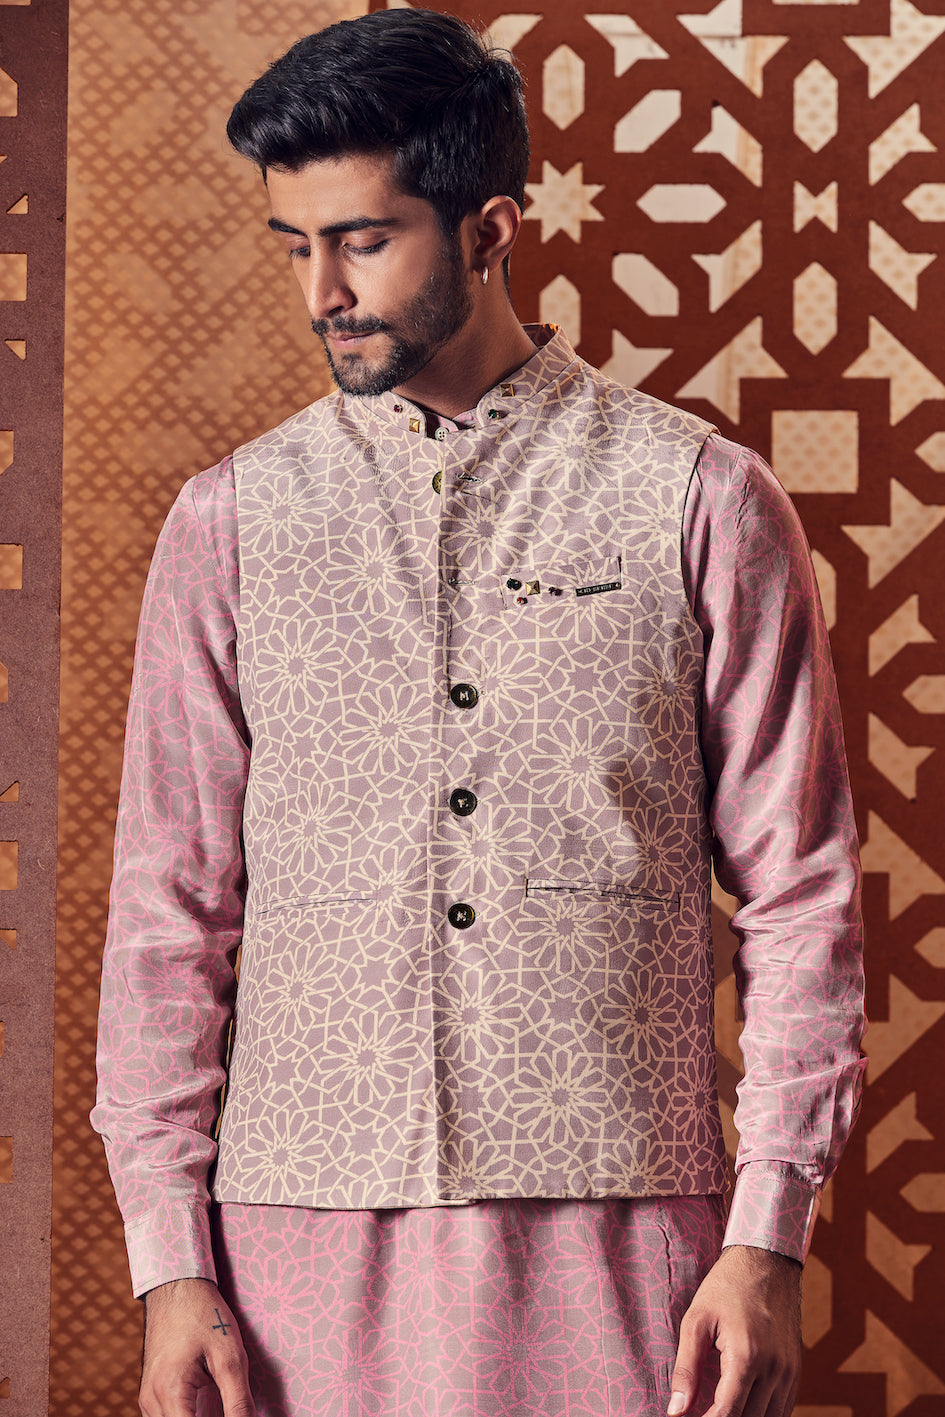 Men's Printed Nehru Jacket at Kamakhyaa by Charkhee. This item is Beige, Cotton, Crepe, Embroidered, Ethnic Wear, Indian Wear, Indianwear Jackets, Jackets, Mens Overlay, Menswear, Naayaab, Natural, Nayaab, Nehru Jacket, Relaxed Fit